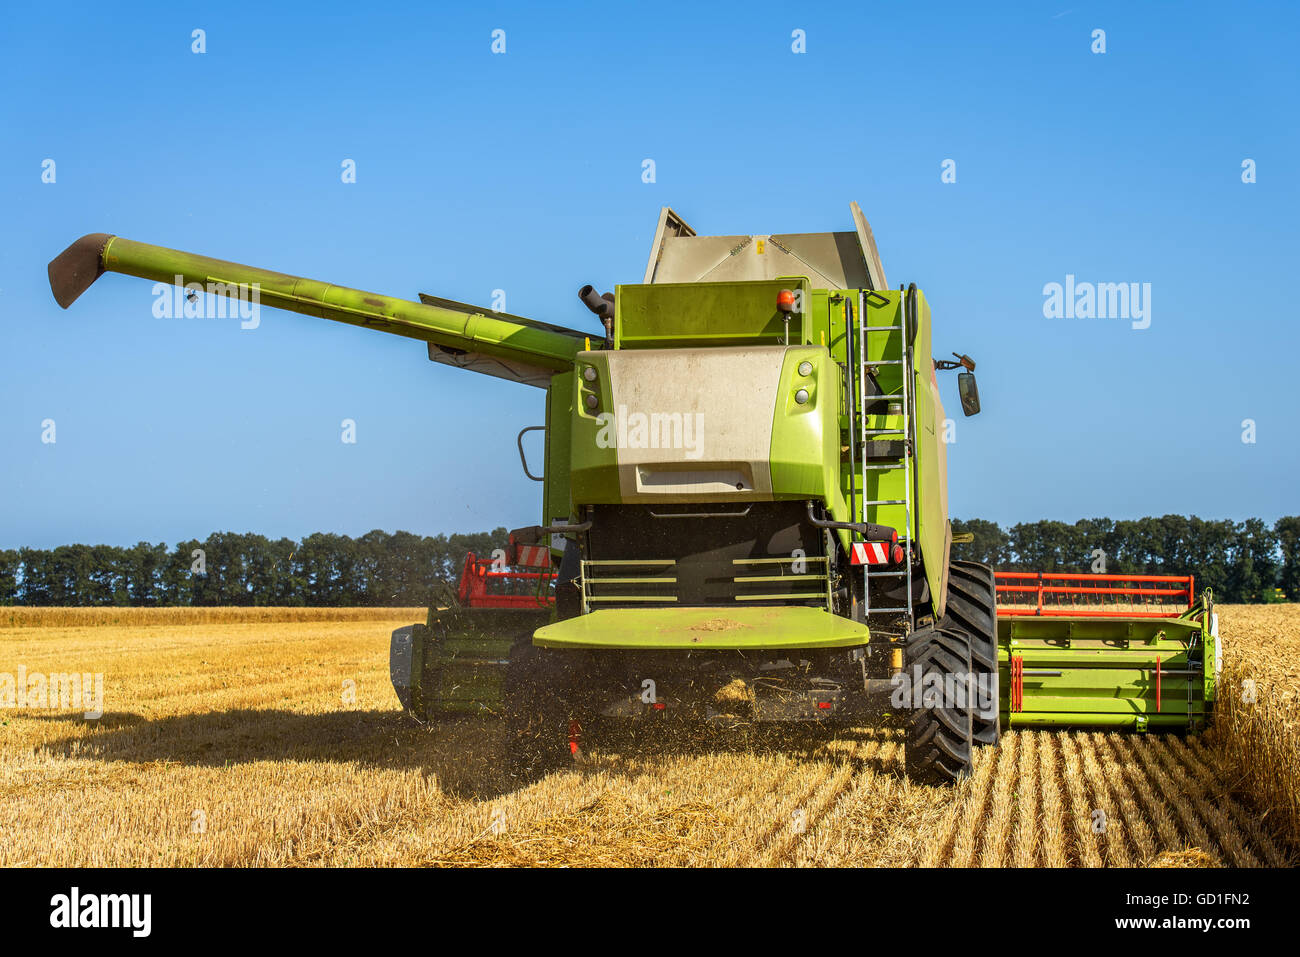 Dobrich, Bulgaria - JULY 08, 2016:Claas Lexion 660 combine harvester on display at the annual Nairn Farmers Show on July 08,2016 Stock Photo